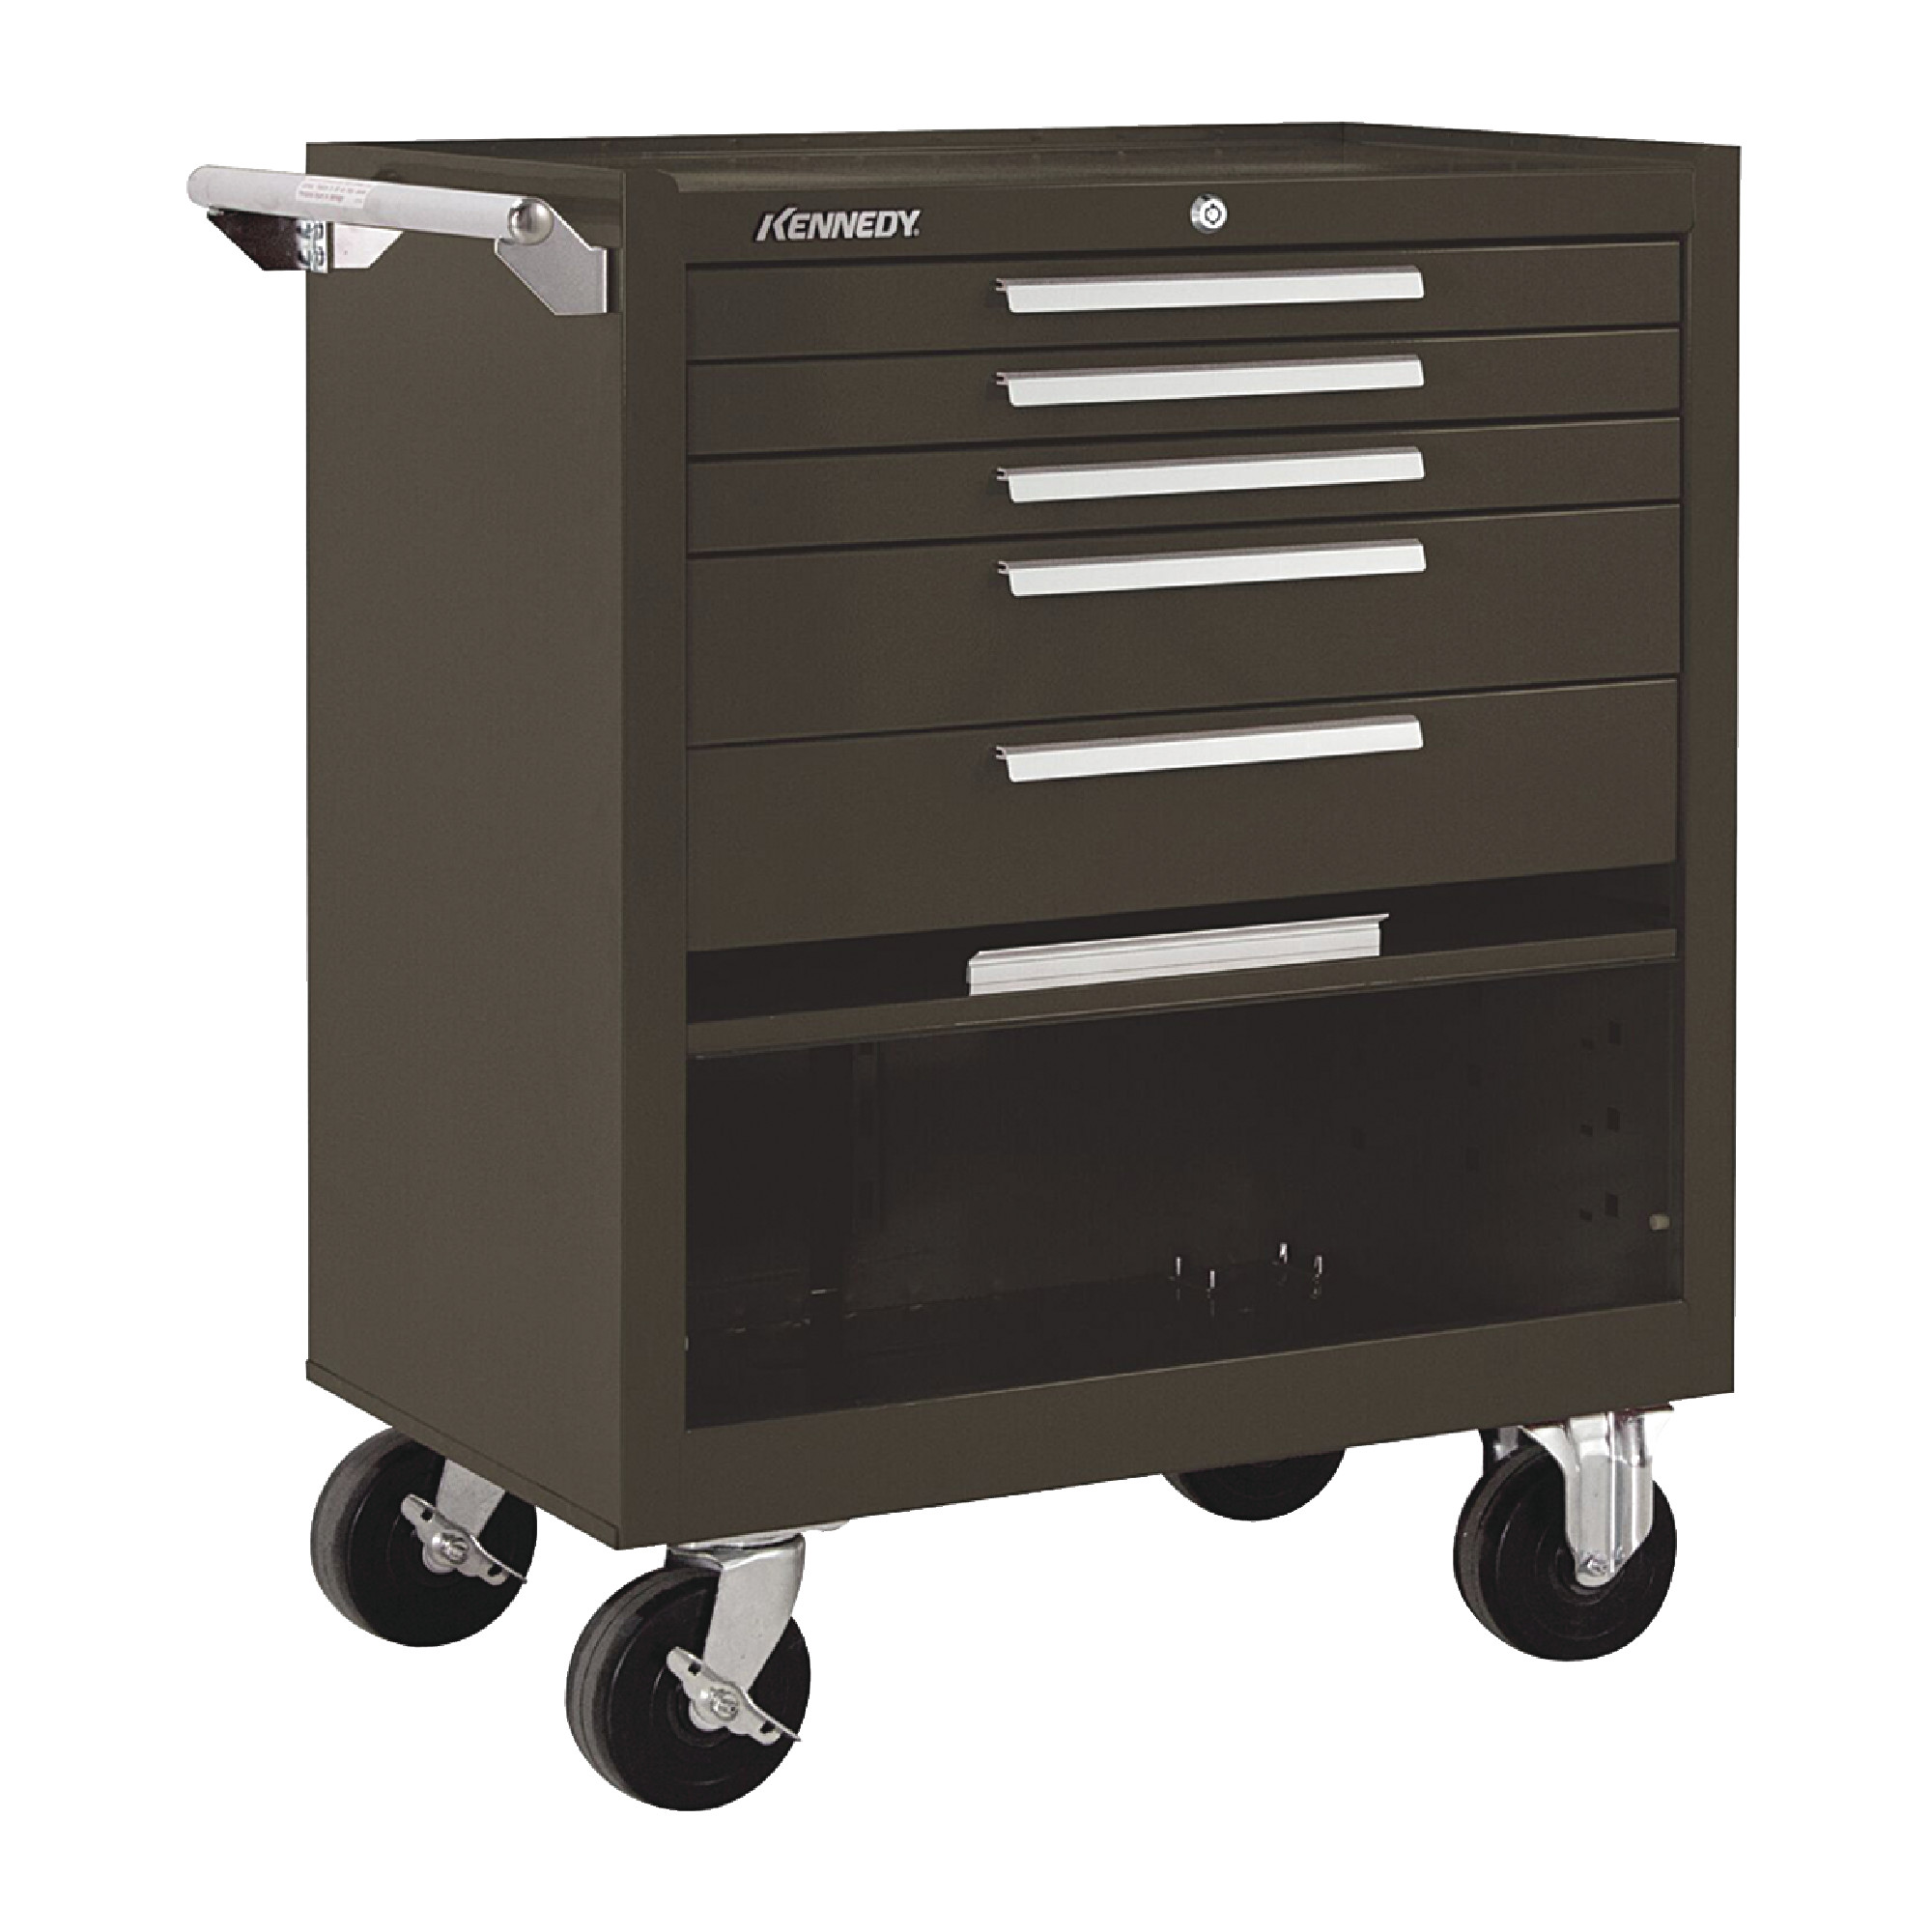 KENNEDY 5 Drawer Roller Cabinet With Friction Slides